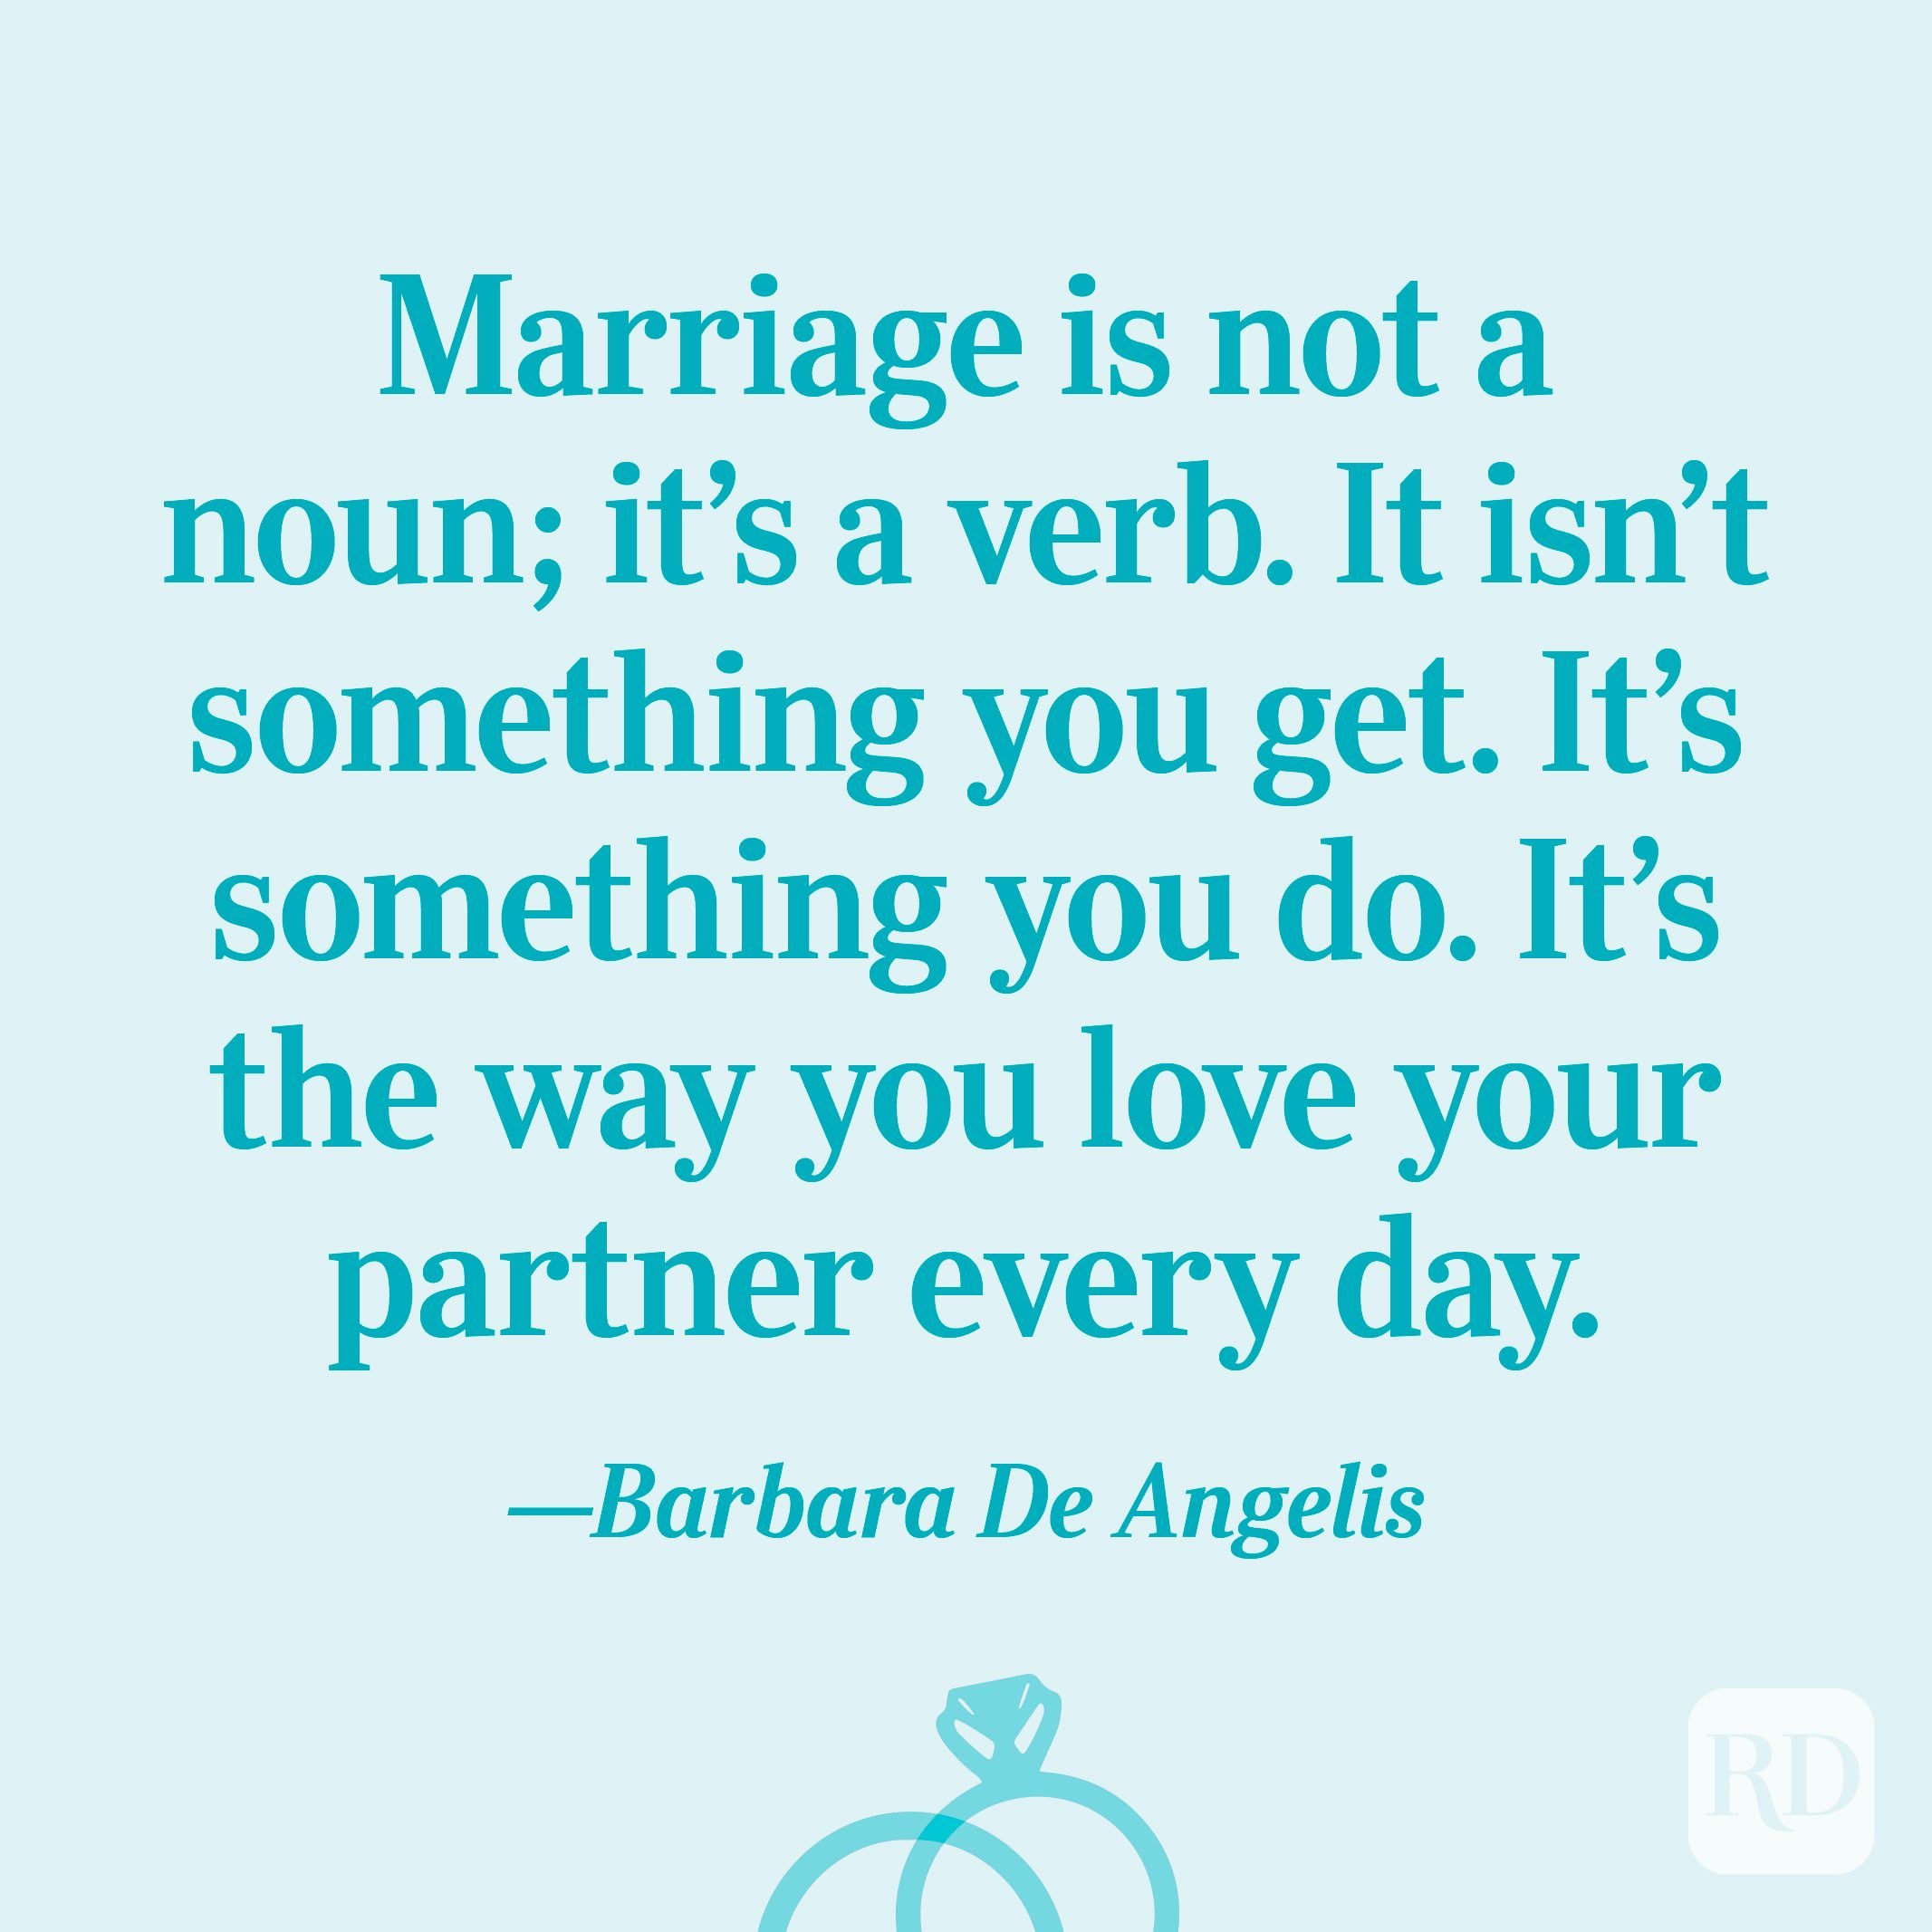 32 Happy Marriage Quotes for Any Couple | Reader's Digest